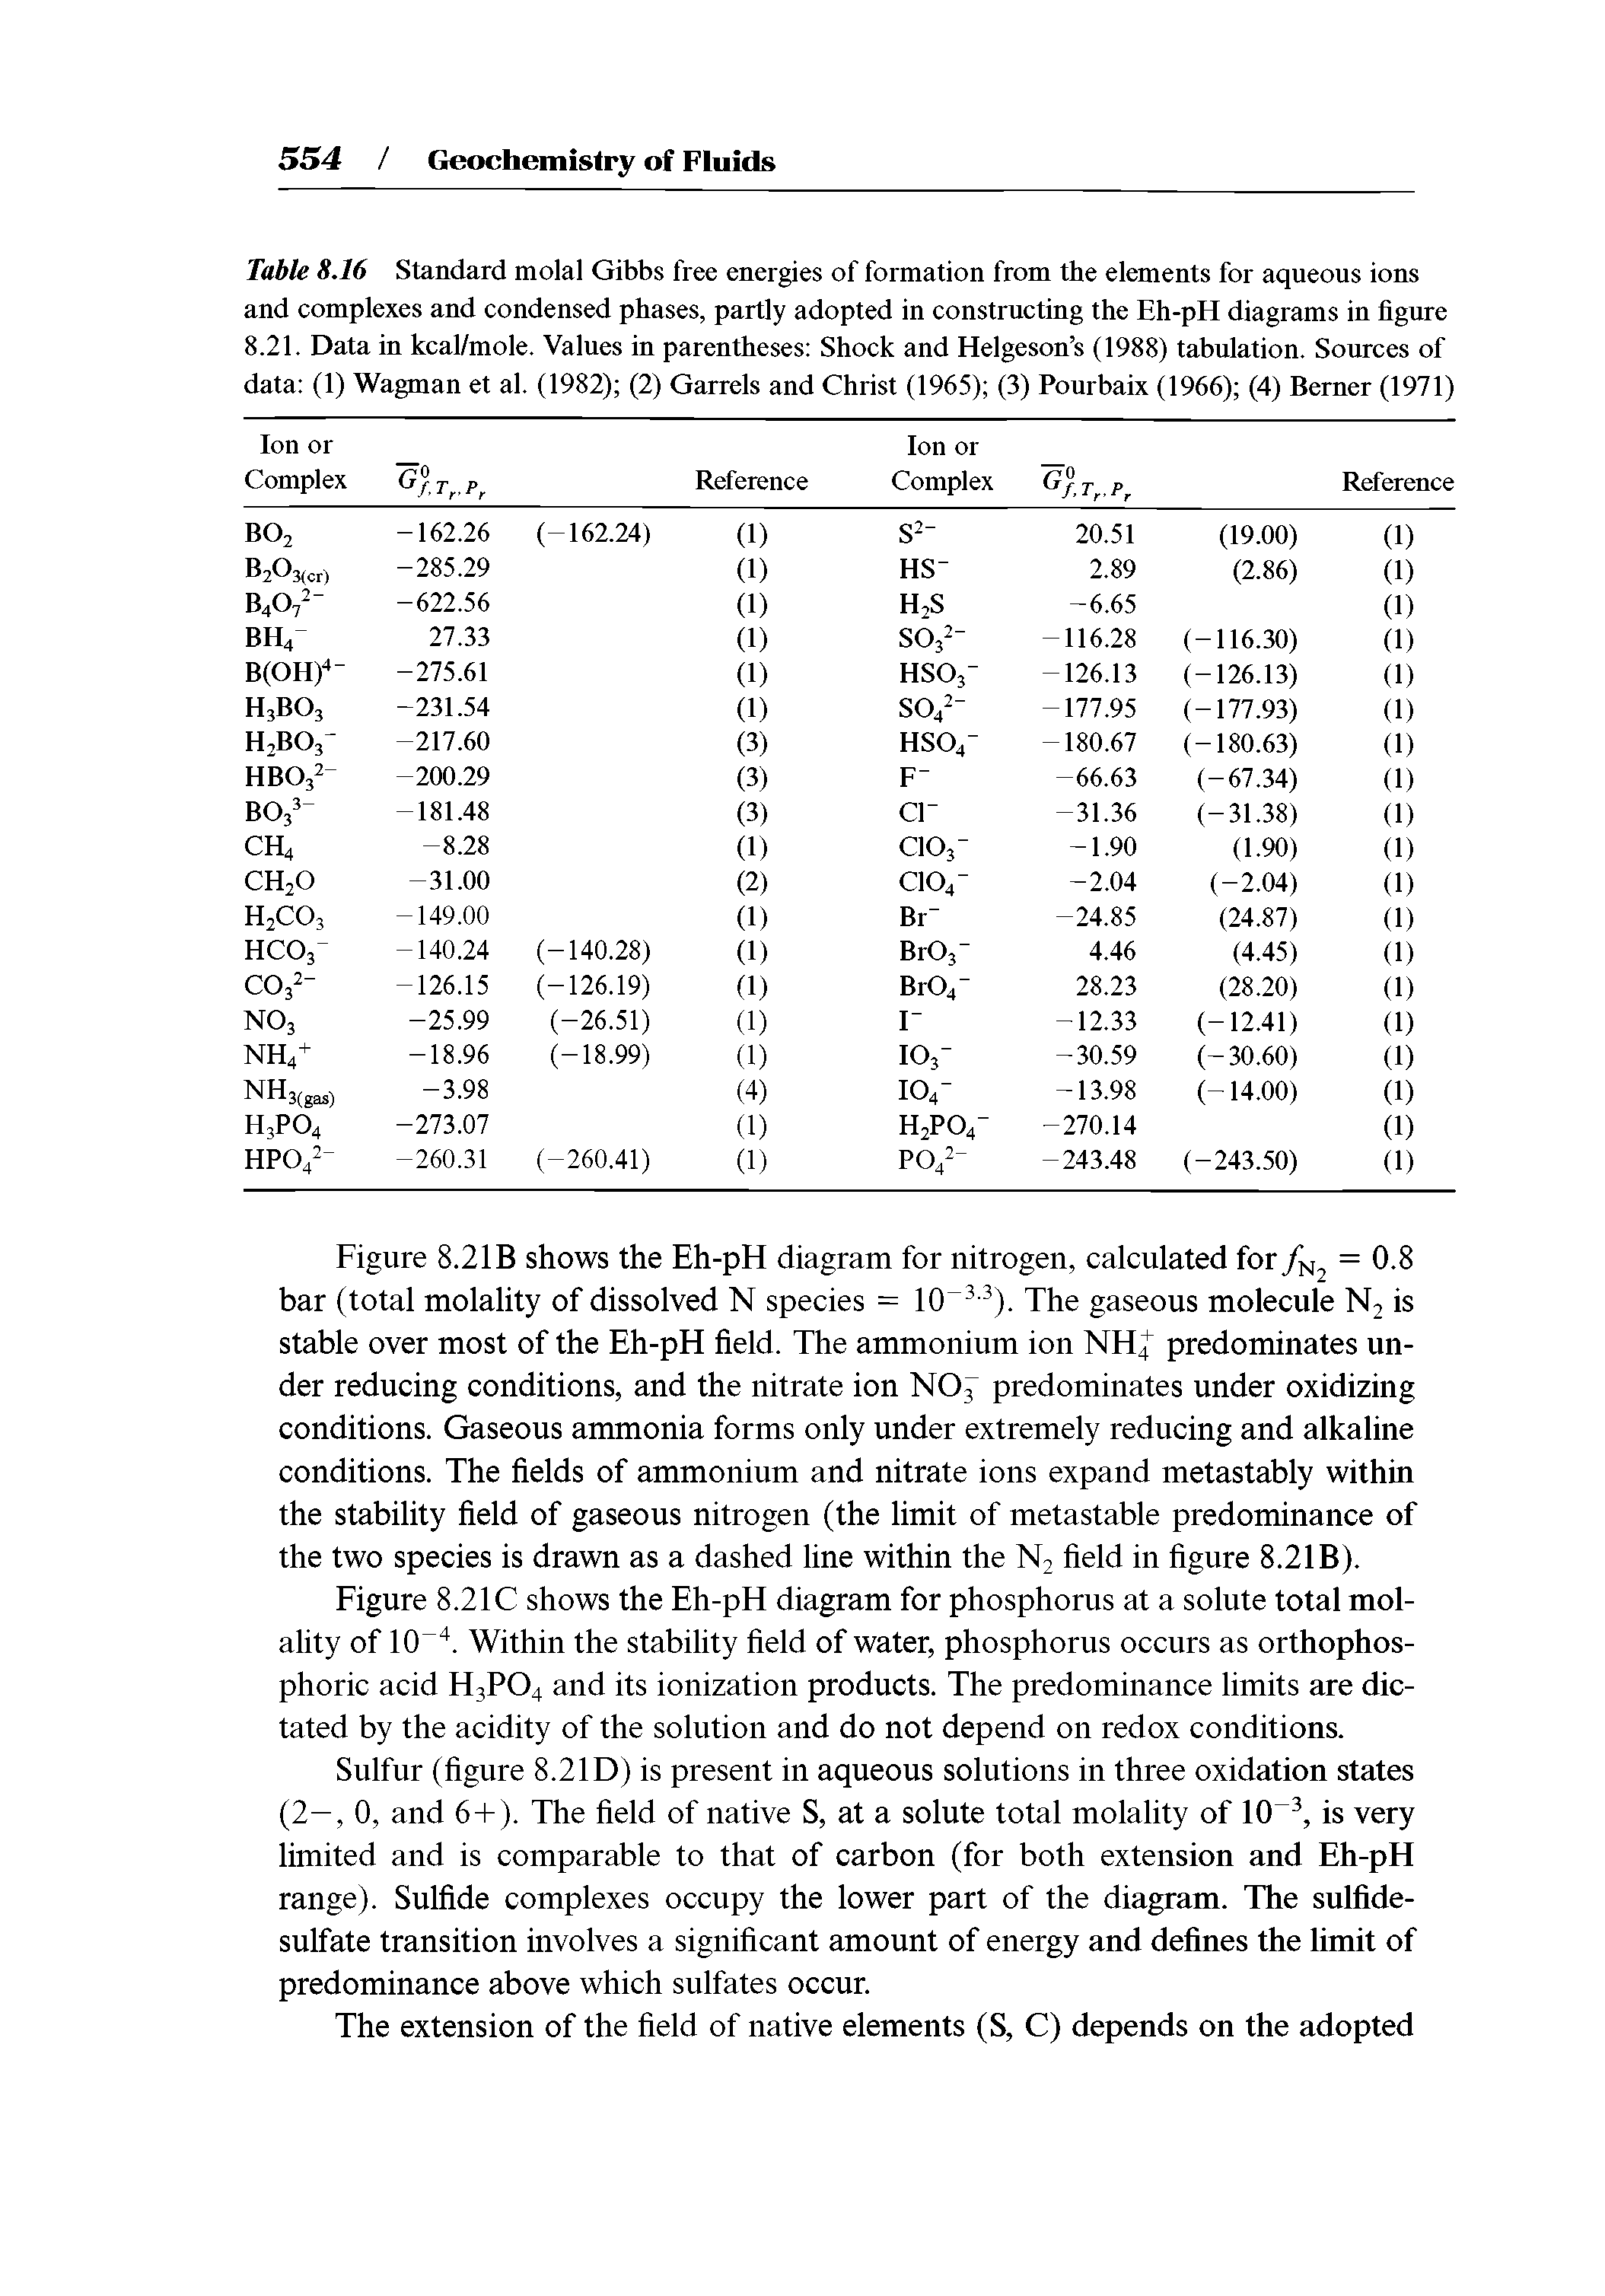 Table 8.16 Standard molal Gibbs free energies of formation from the elements for aqueous ions and complexes and condensed phases, partly adopted in constructing the Eh-pH diagrams in figure 8.21. Data in kcal/mole. Values in parentheses Shock and Helgeson s (1988) tabulation. Sources of data (1) Wagman et al. (1982) (2) Garrels and Christ (1965) (3) Pourbaix (1966) (4) Berner (1971)...